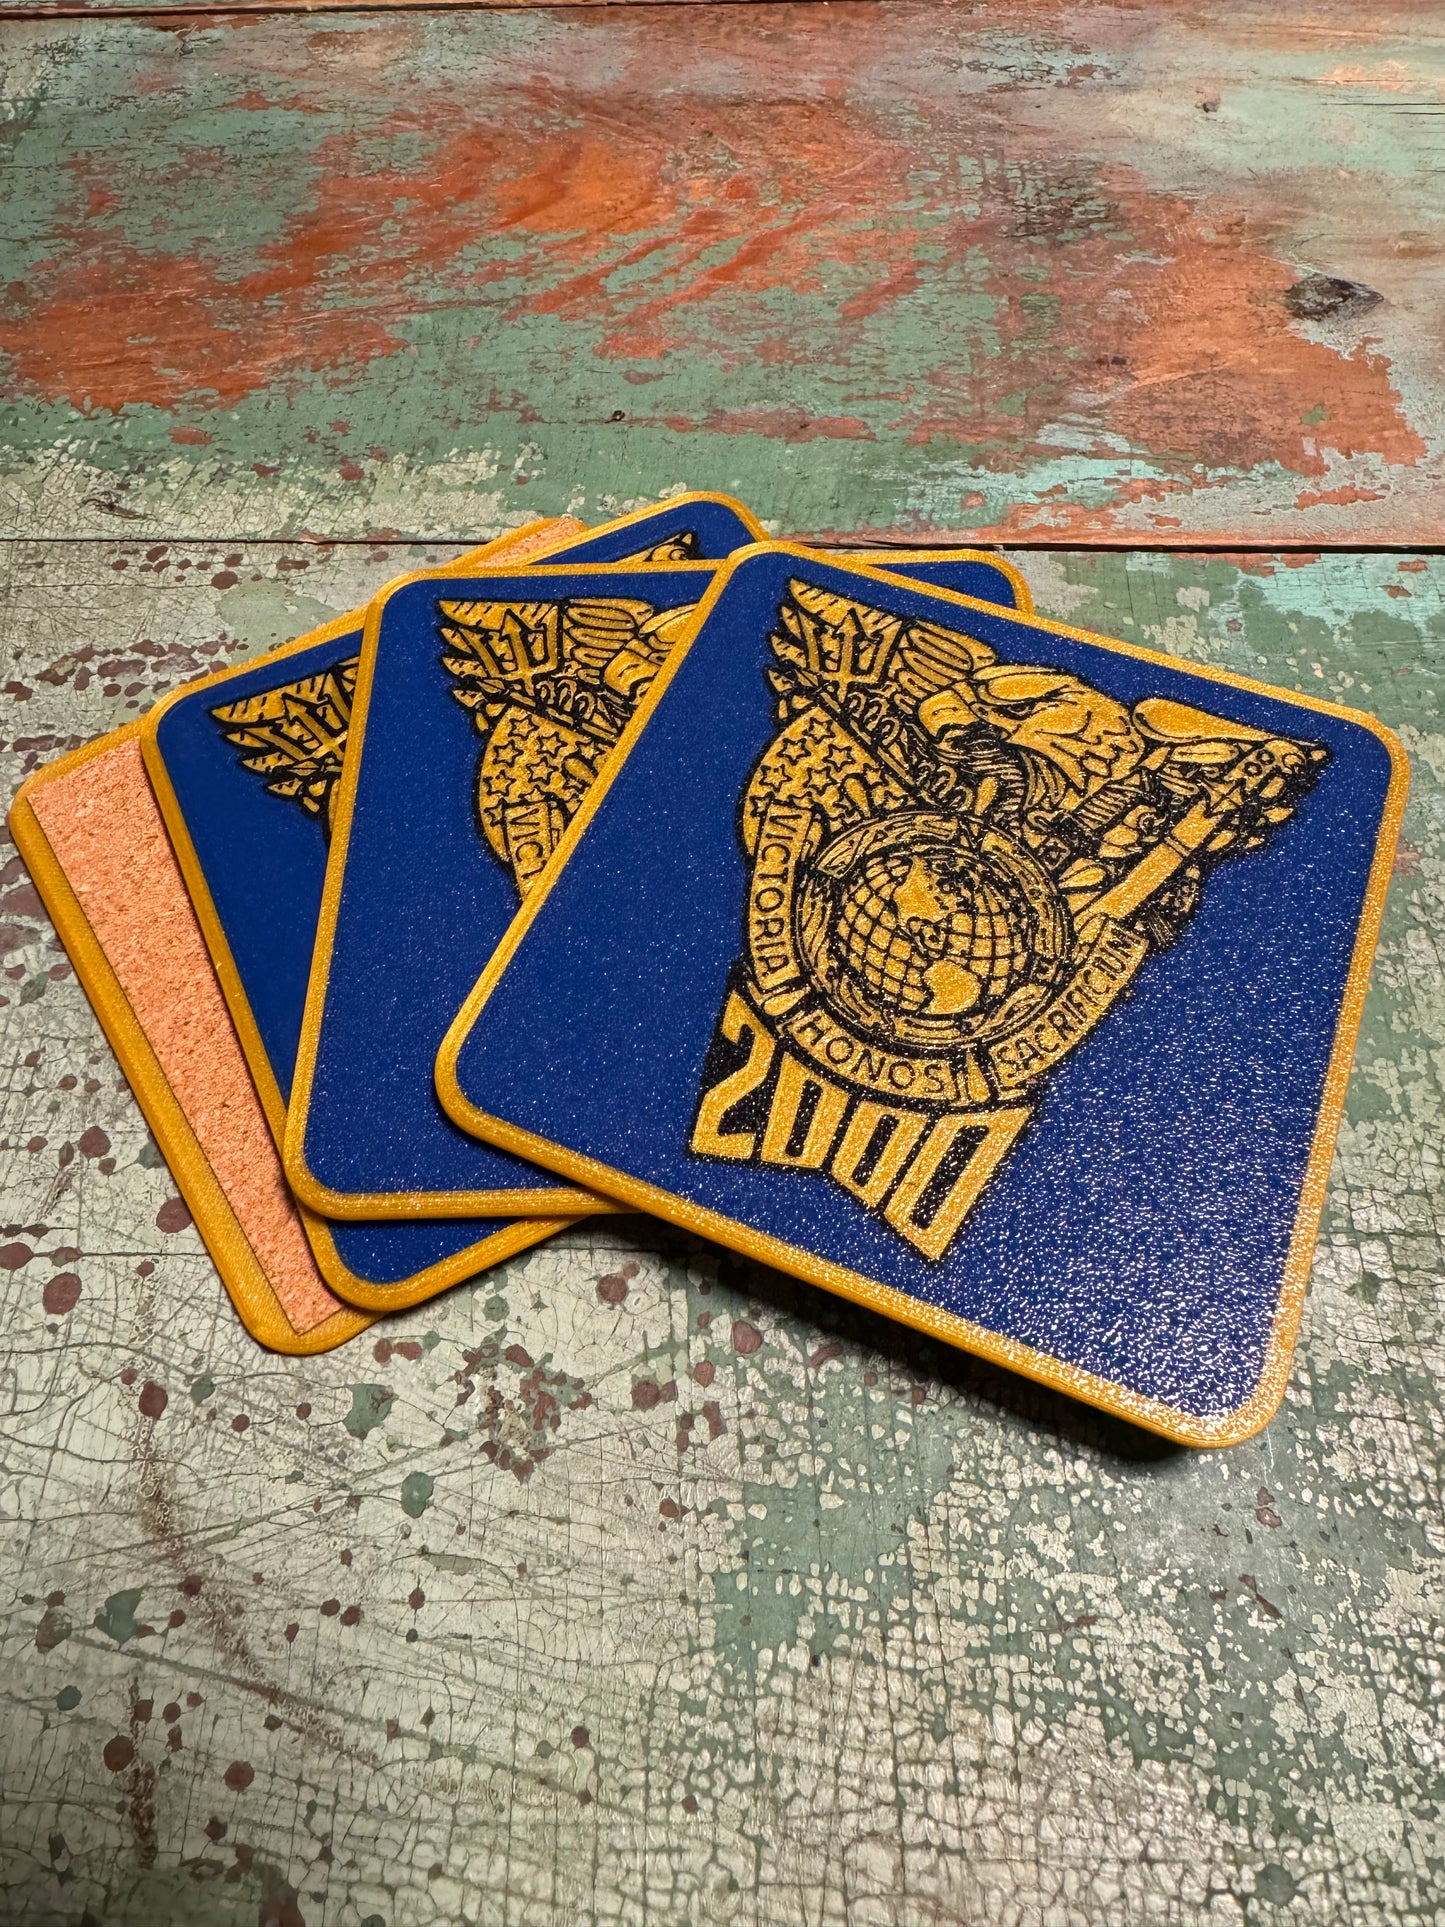 USNA Class of 2000 Drink Coasters